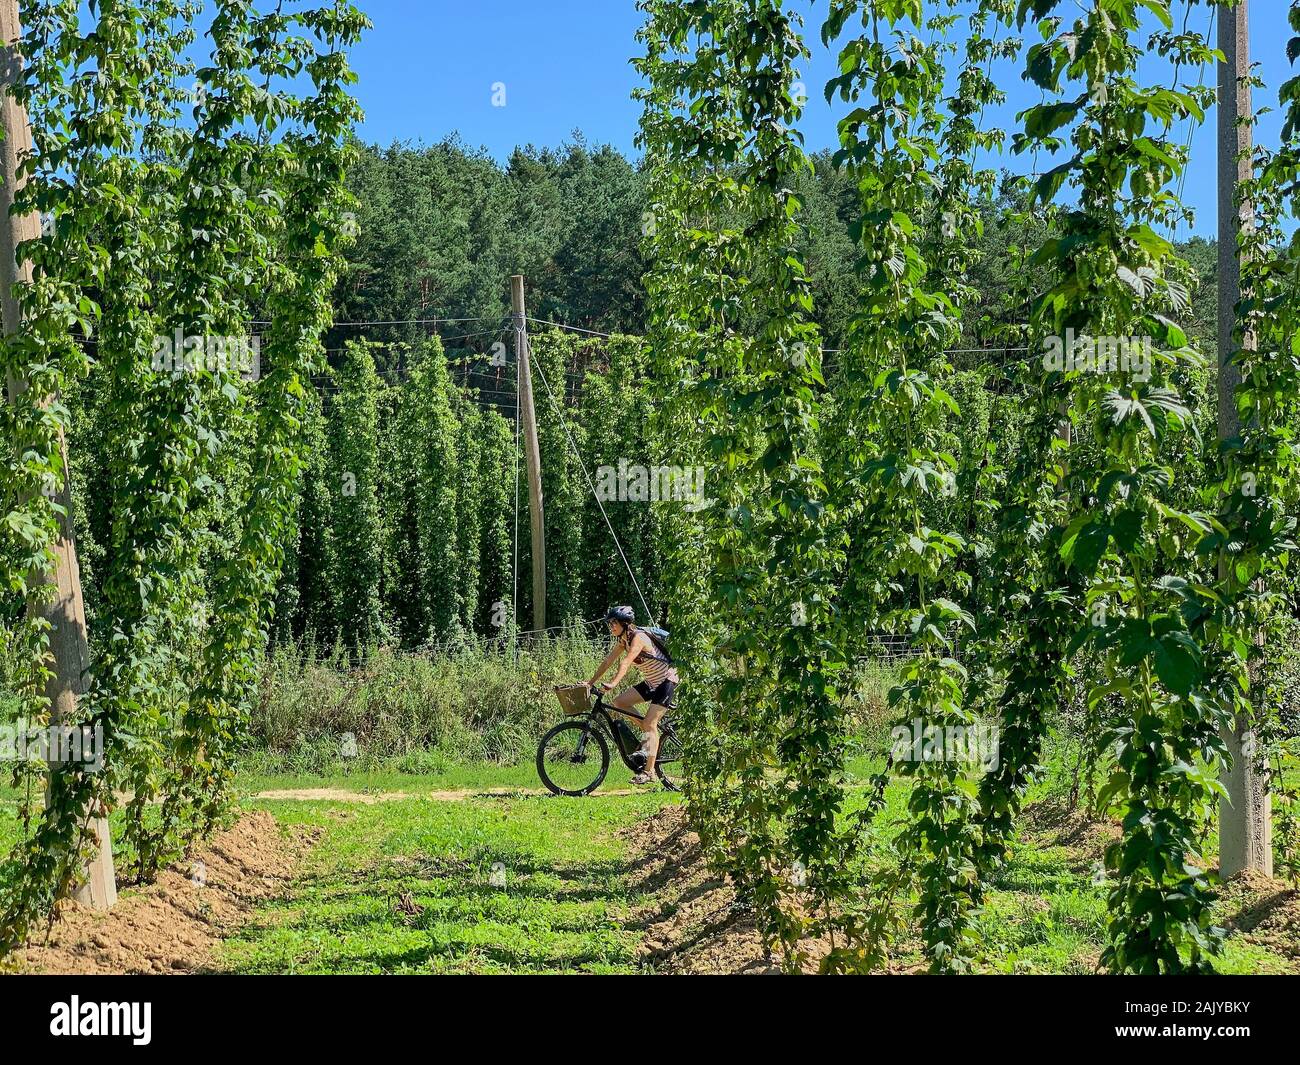 Woman cycling in Hop cultivation, growing area in Pfaffenhofen / Ilm  Bavaria, Germany, August 18, 2019. © Peter Schatz / Alamy Stock Photos  Stock Photo - Alamy